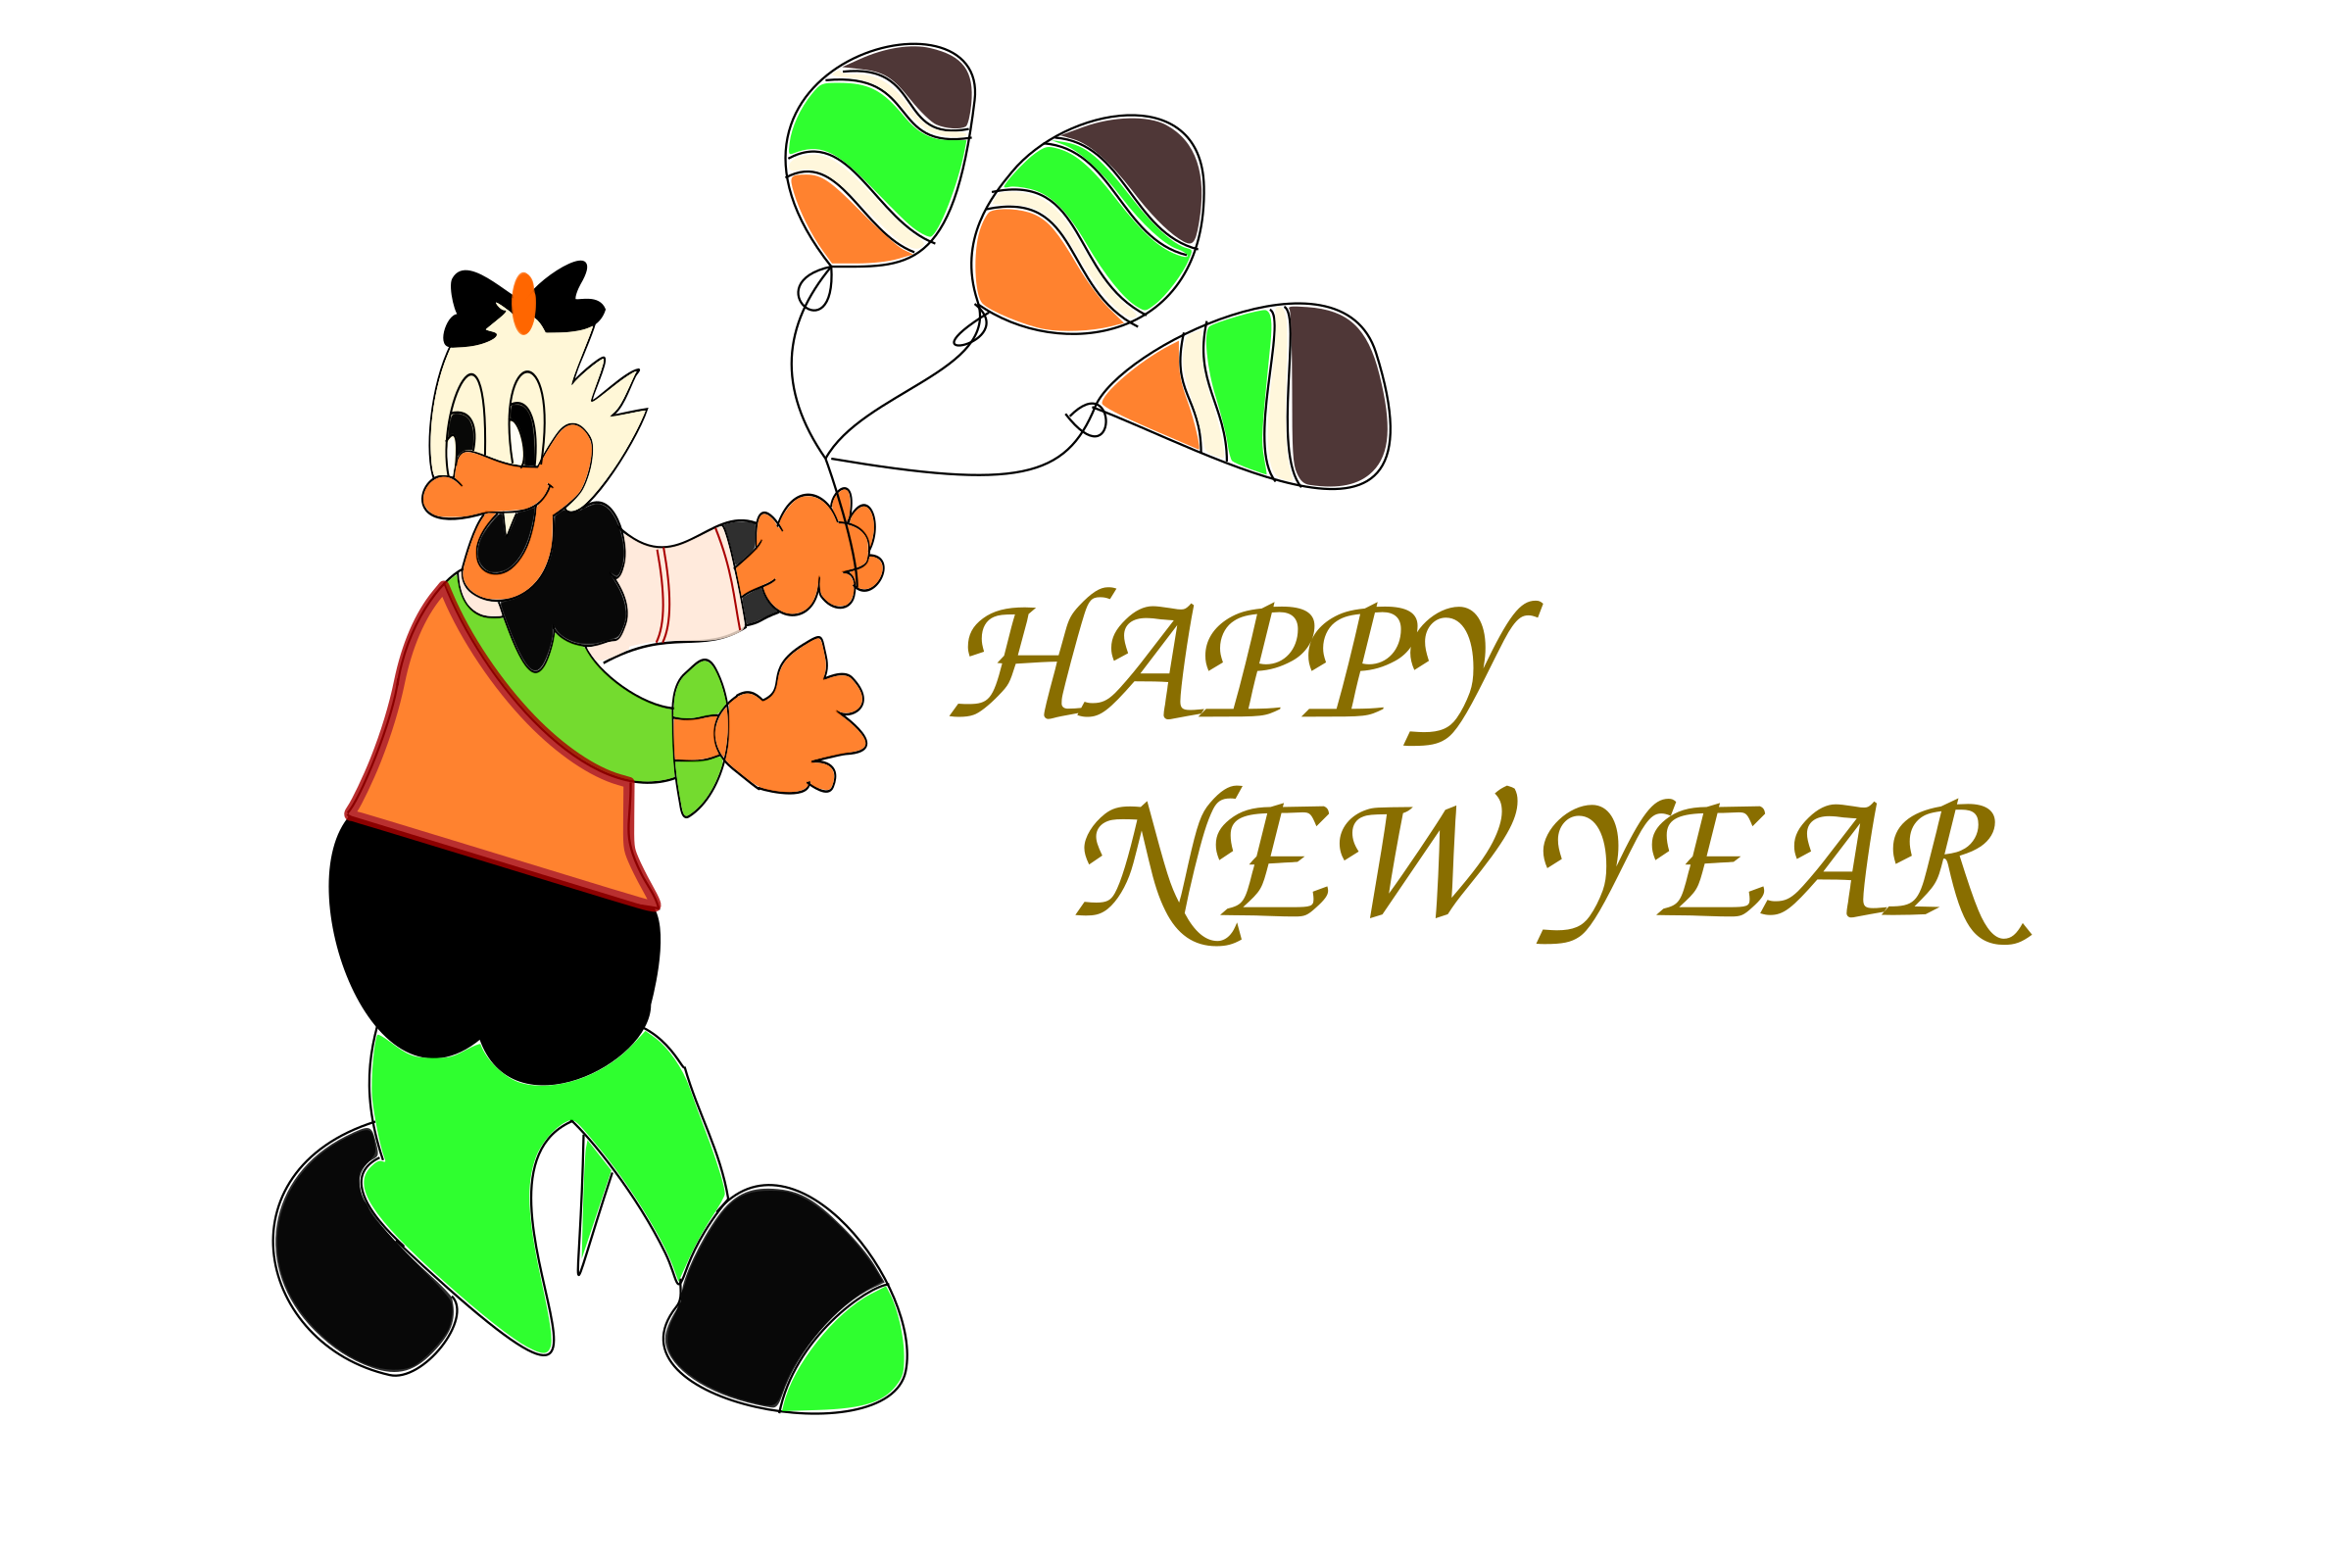 new year wishes clipart - photo #46